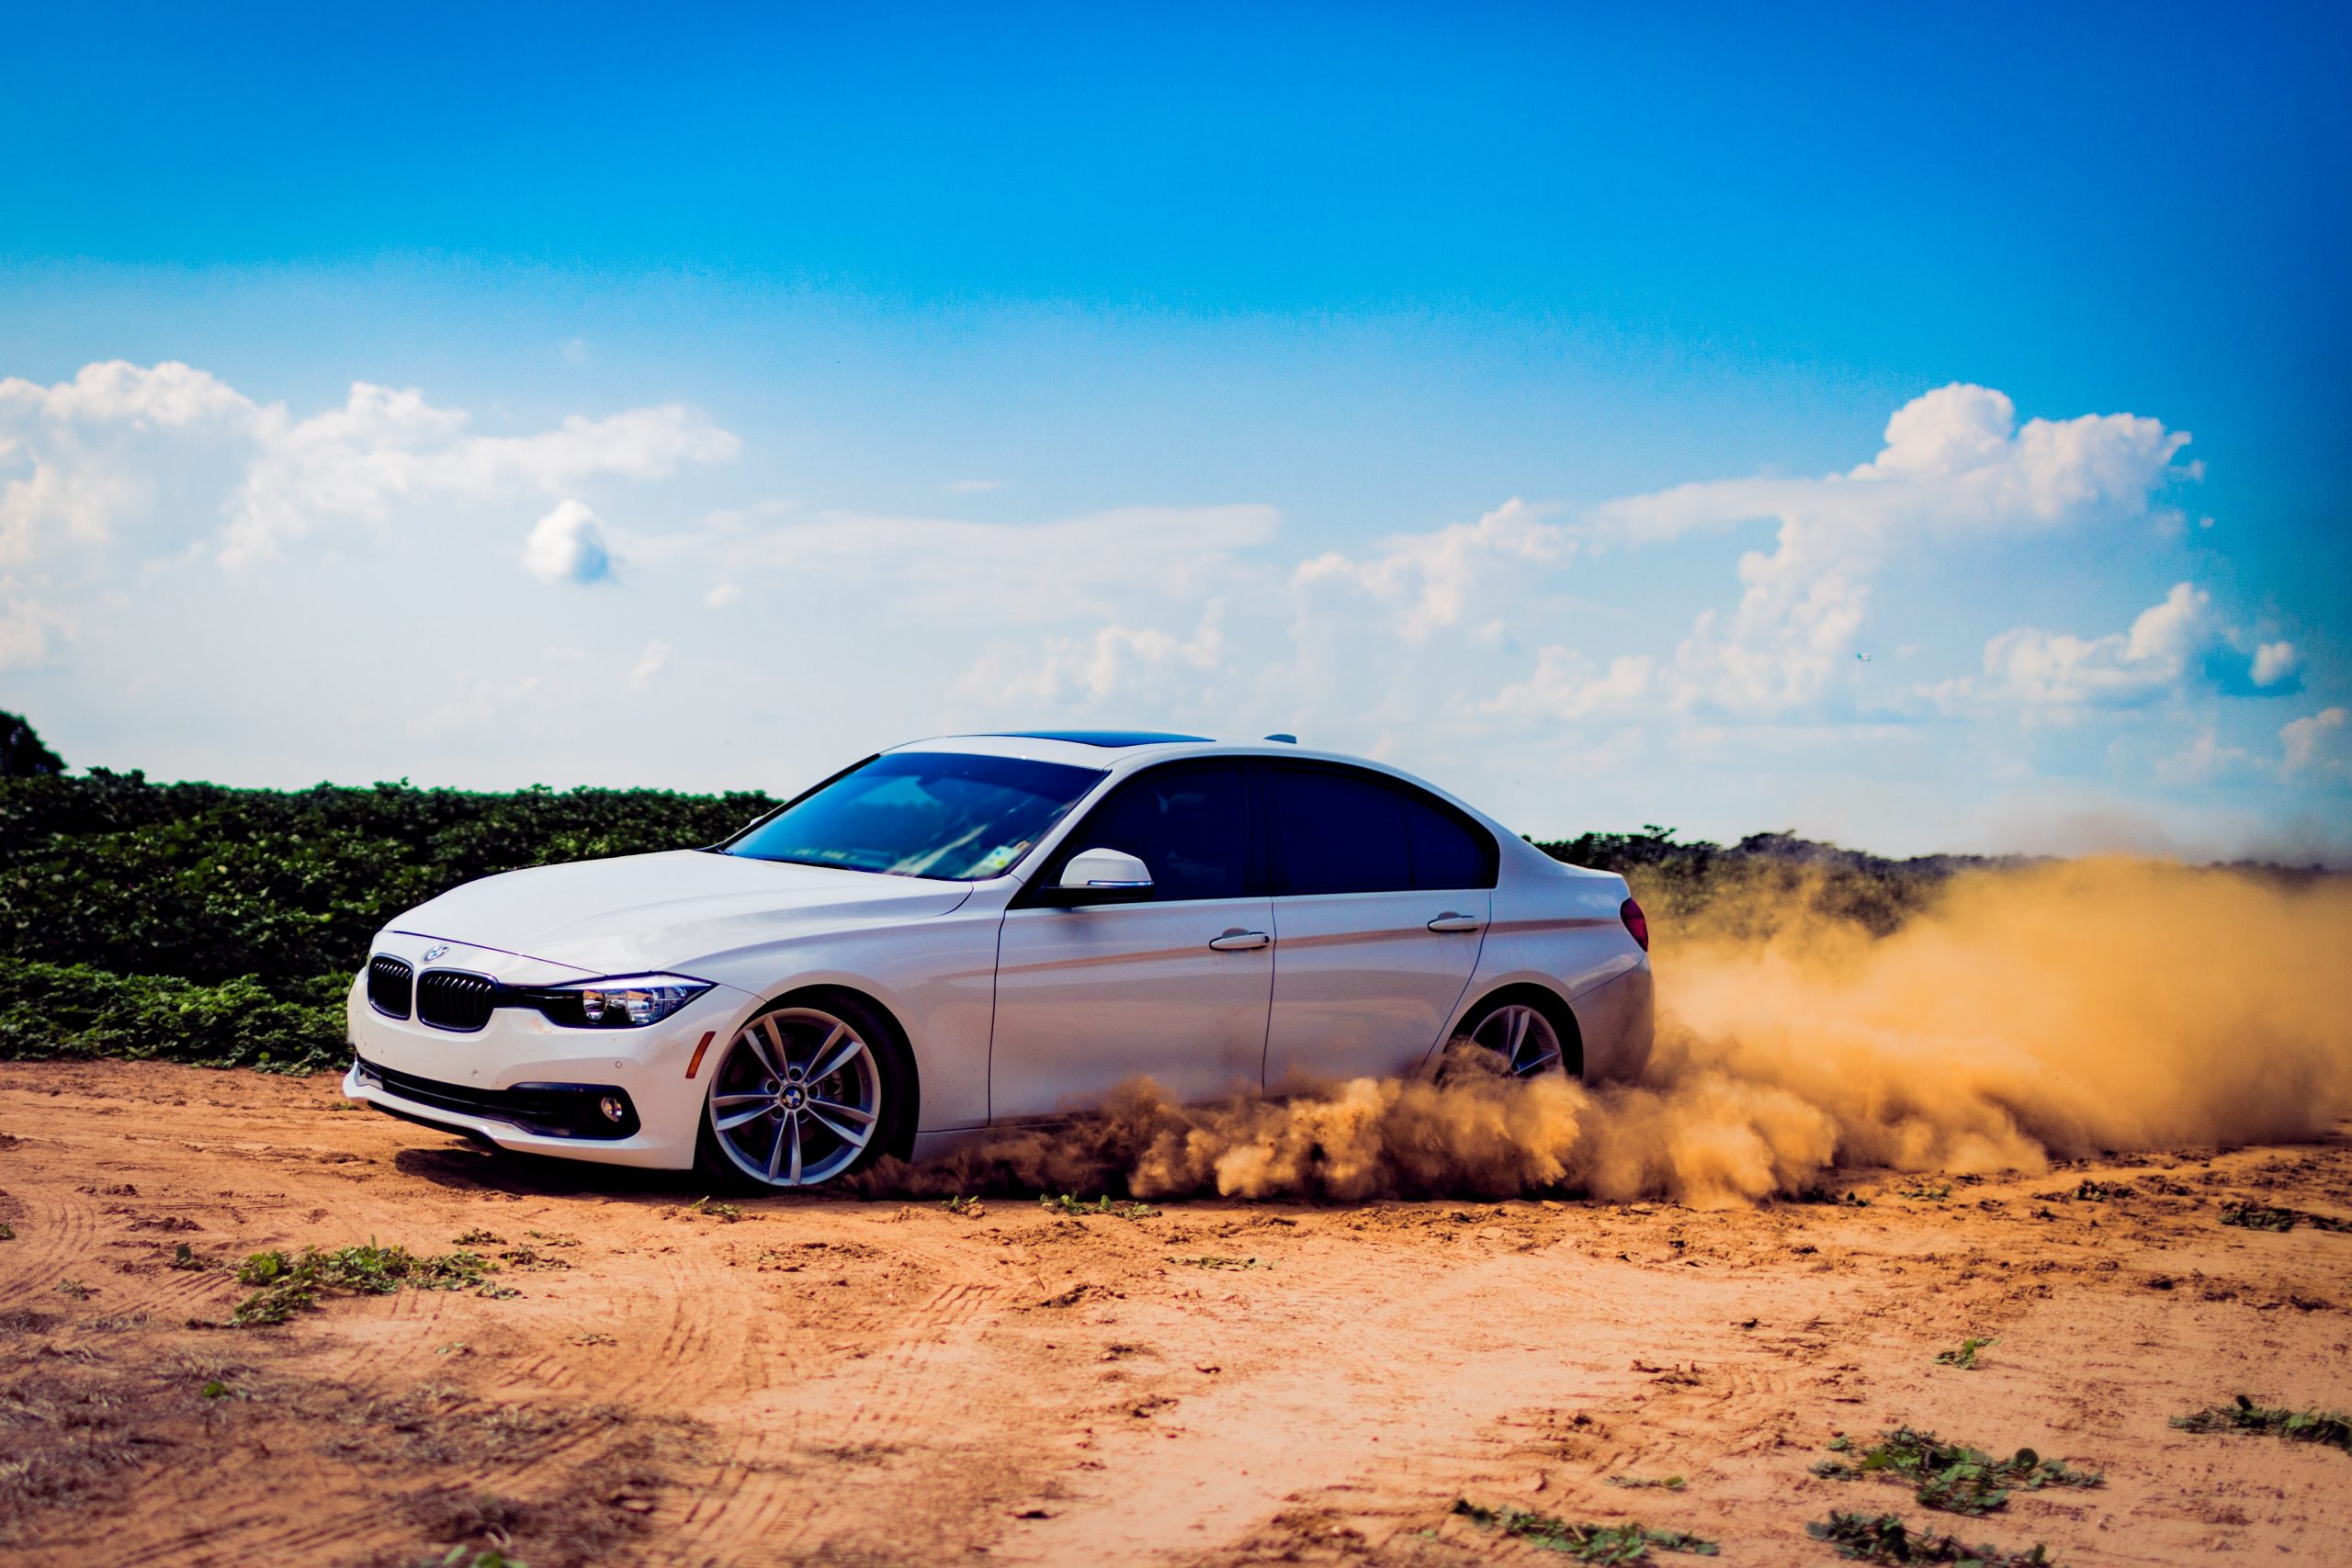 BMW Drifting in the sand